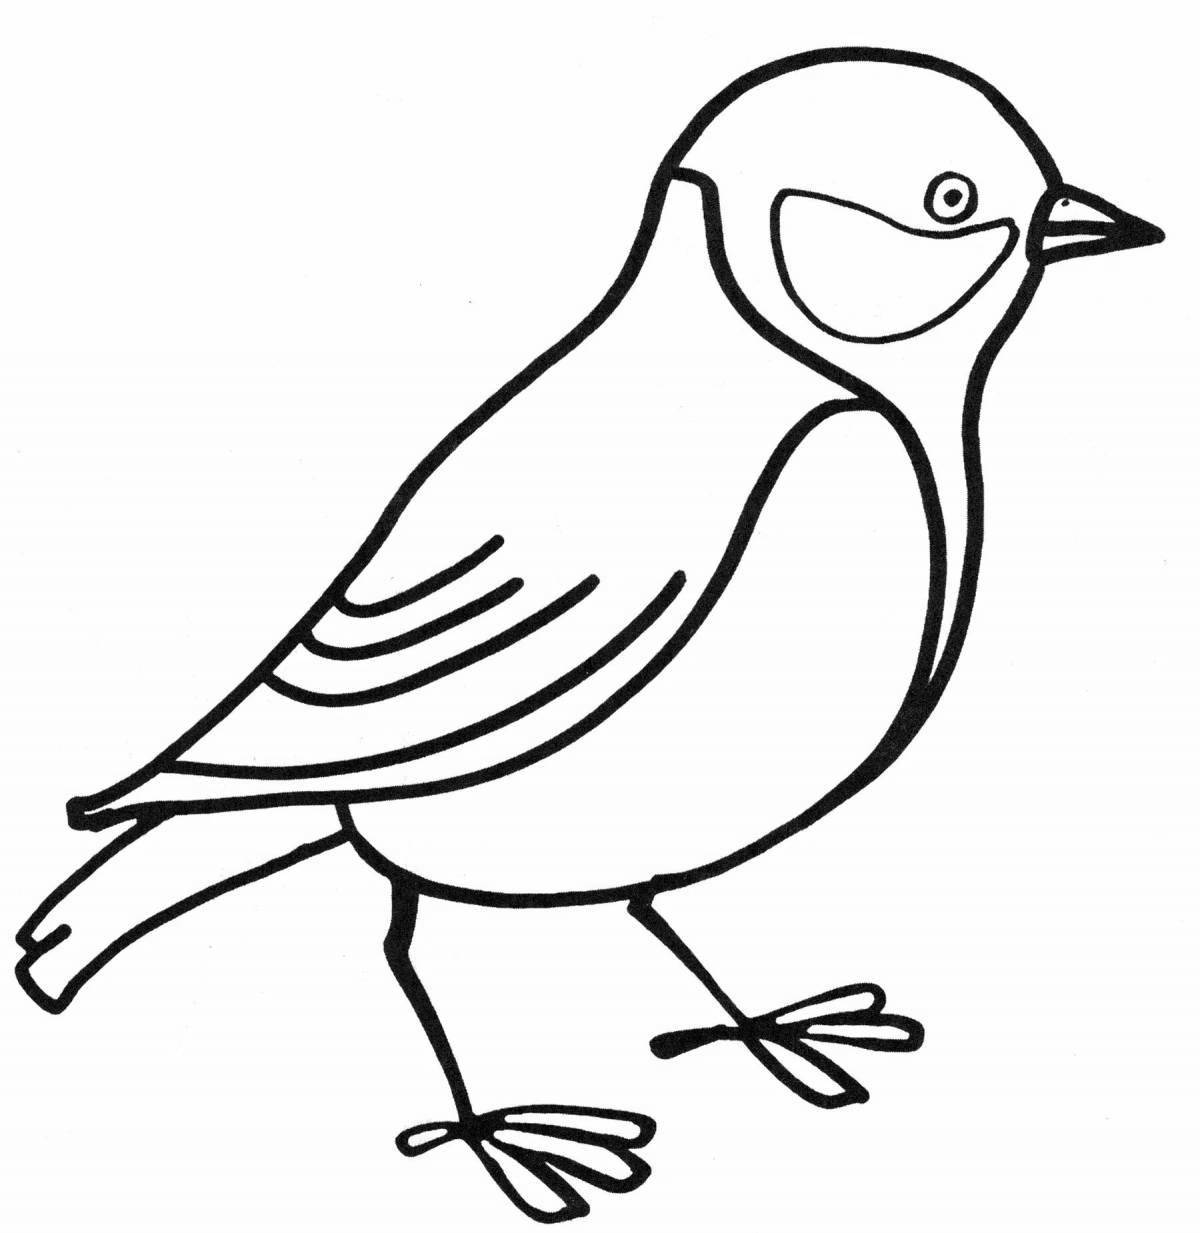 Playful tit coloring book for 3-4 year olds